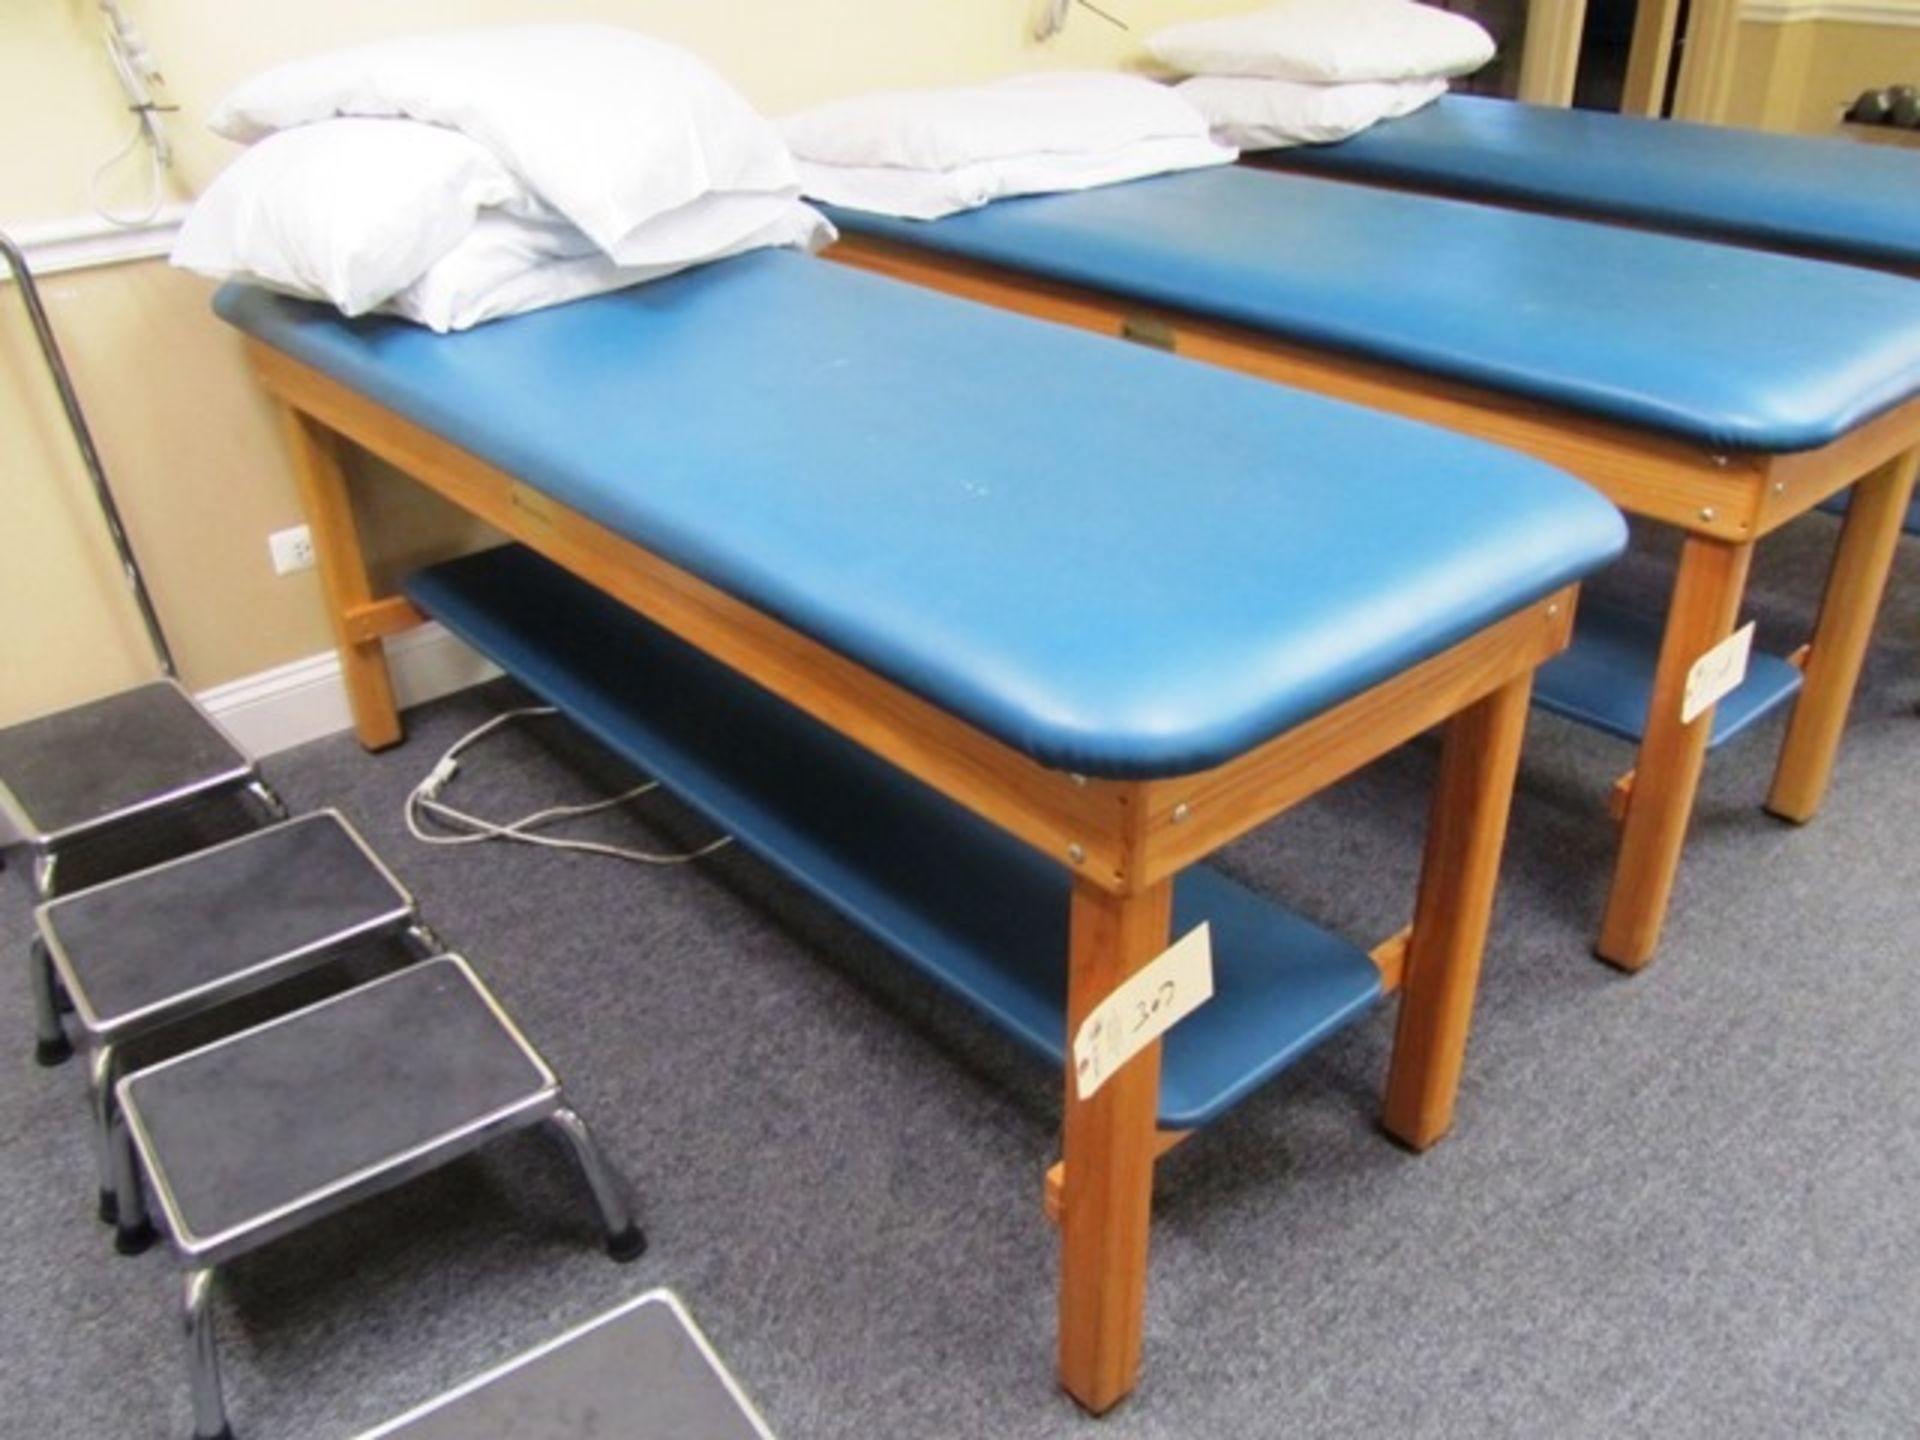 Dynatronics Exam Table*located Orland Park, IL